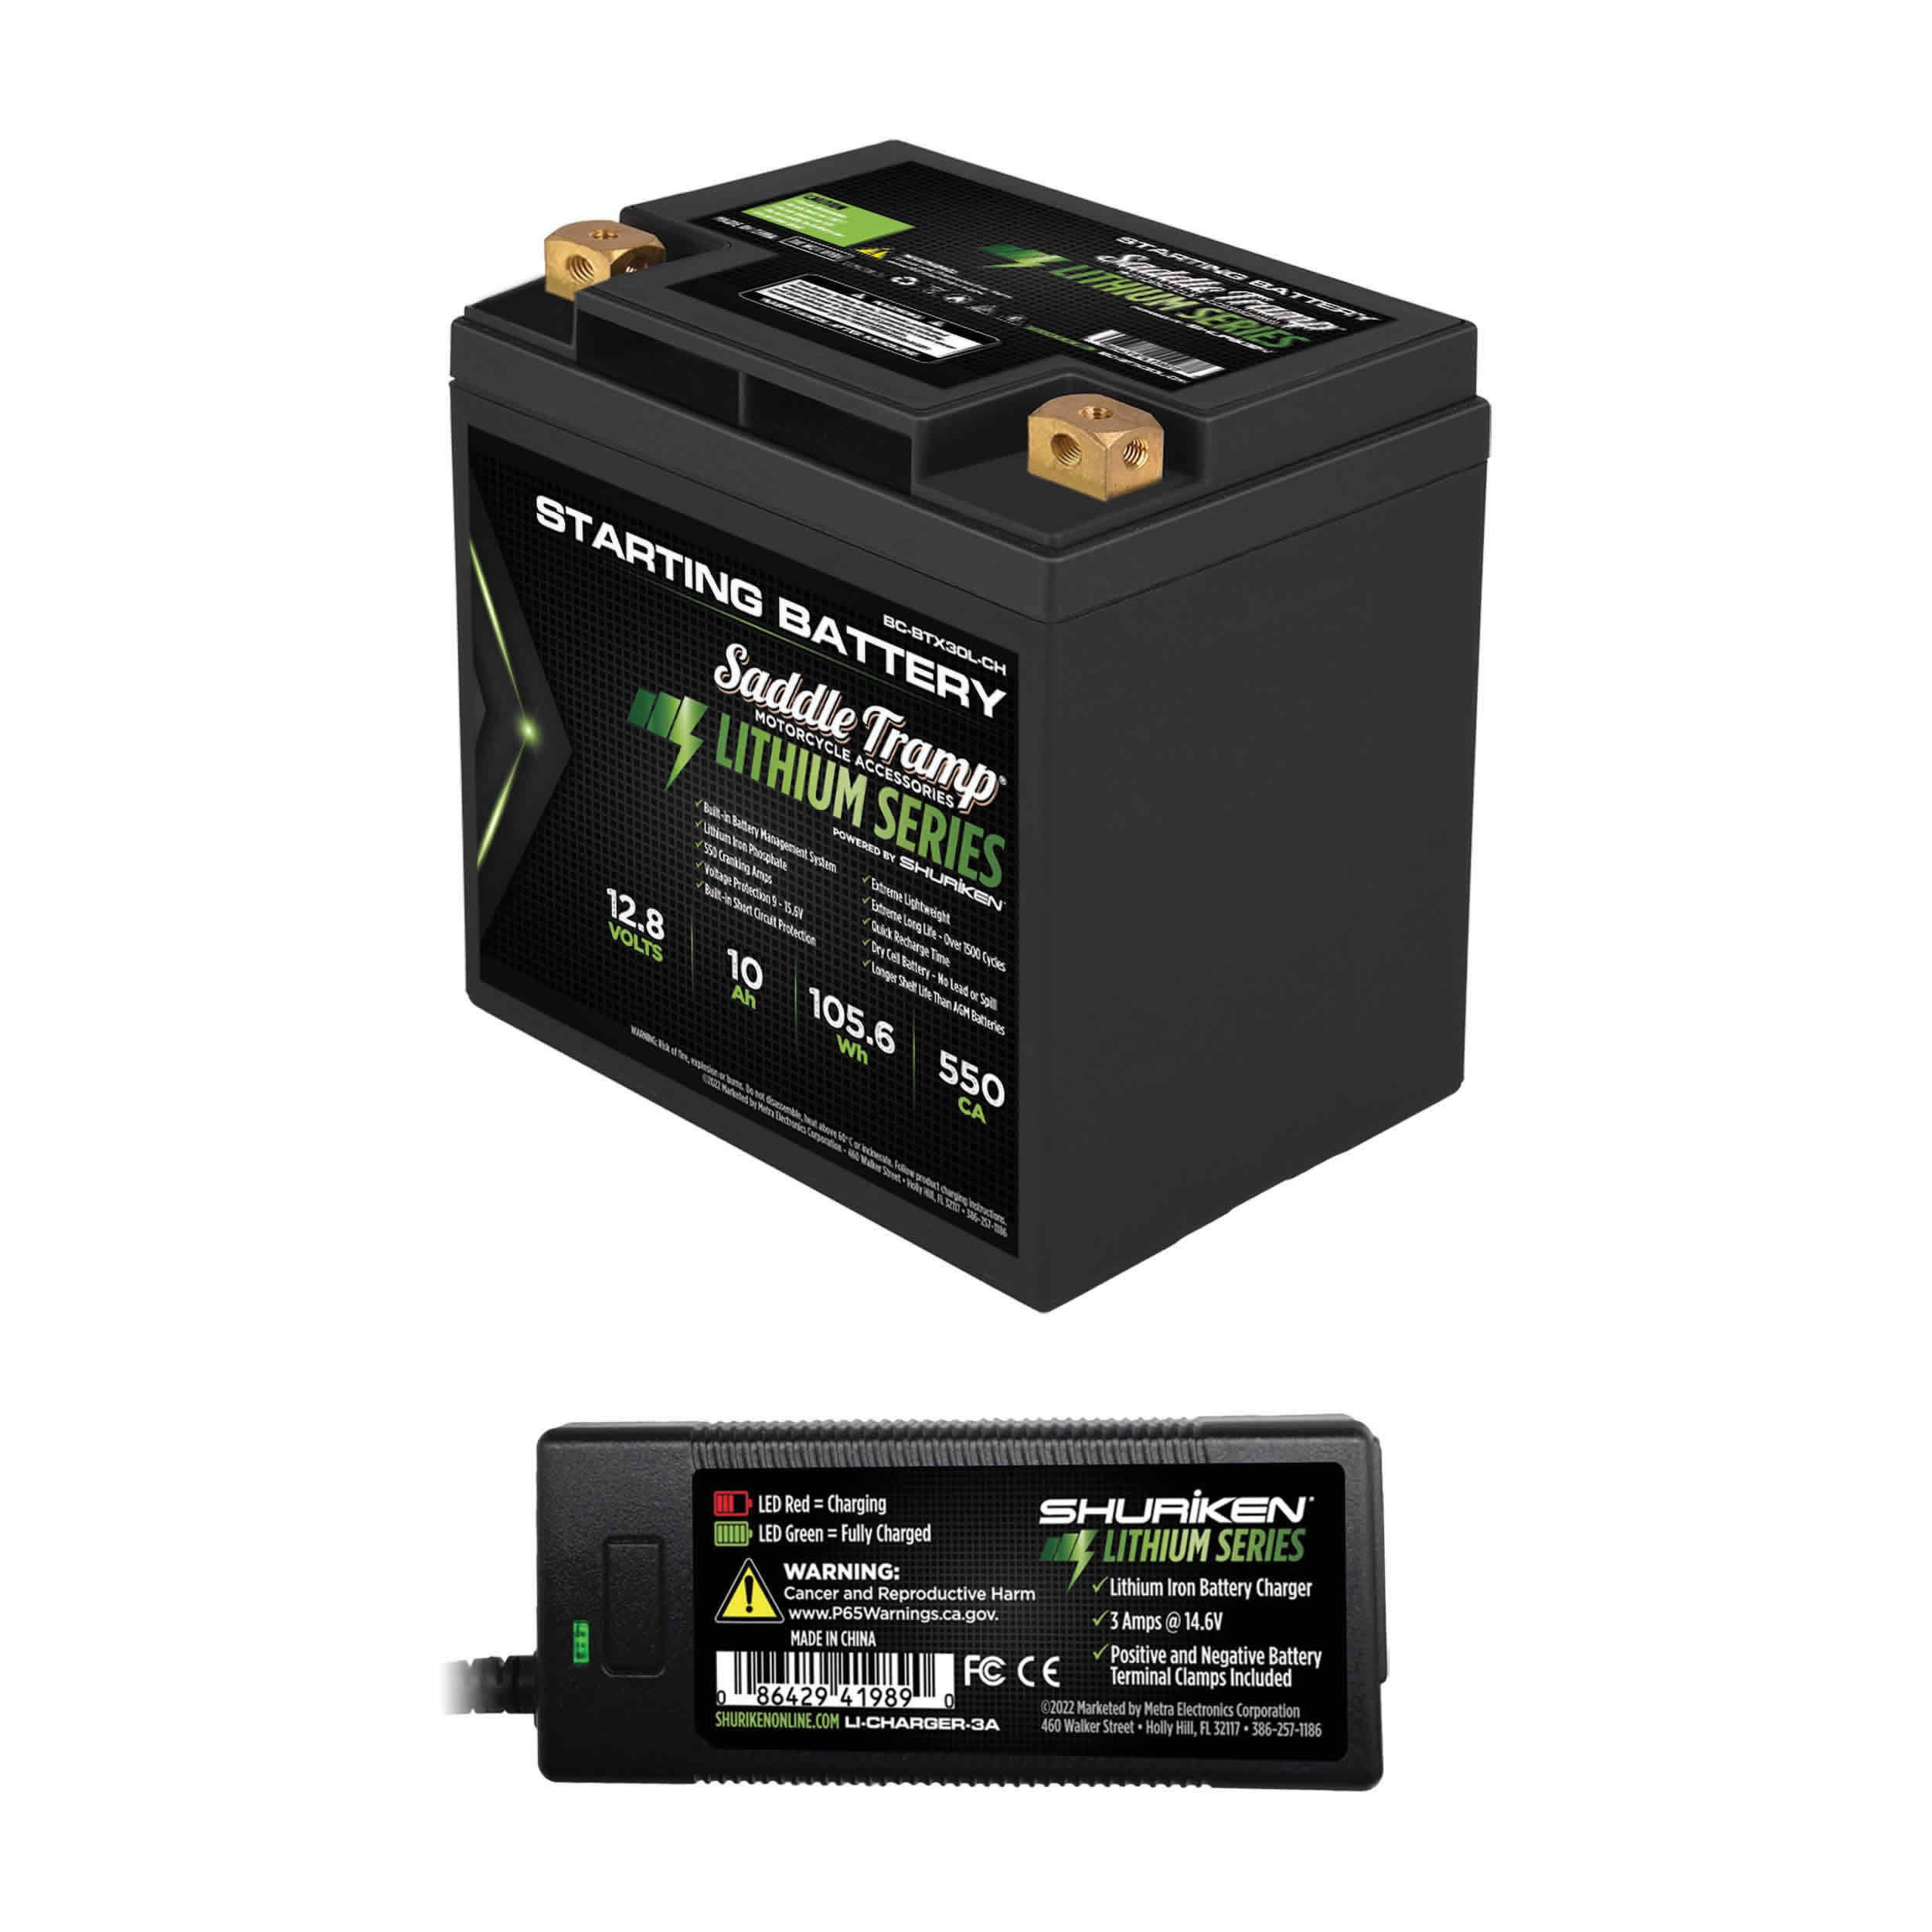 550CA / 28 Amp Hour Lithium-Ion Starting Battery with Charger